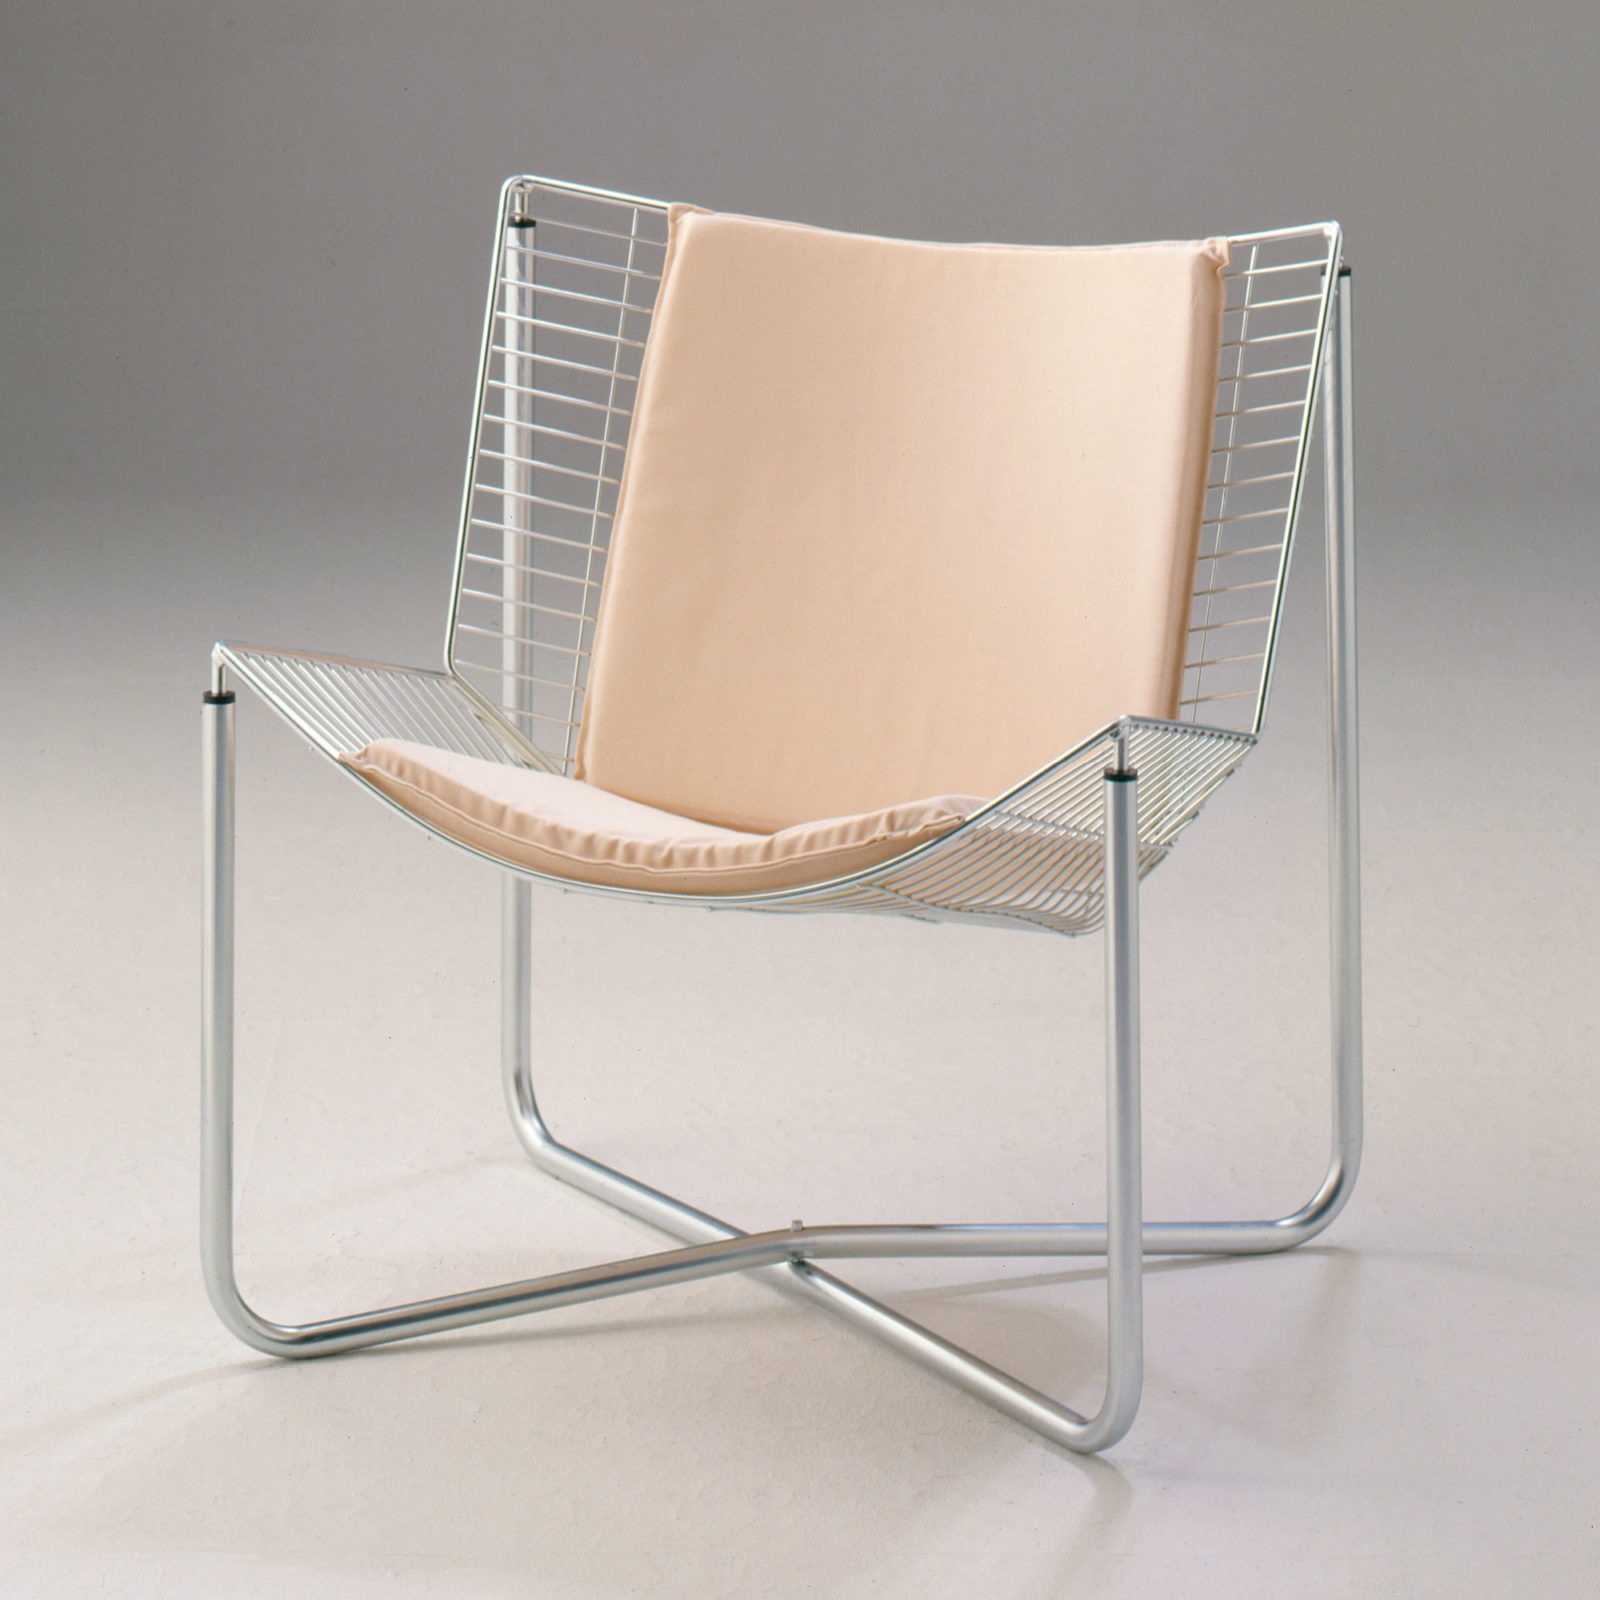 Easy chair with beige seat and back visions, frame made of pressed and welded together steel mesh, JÄRPEN.